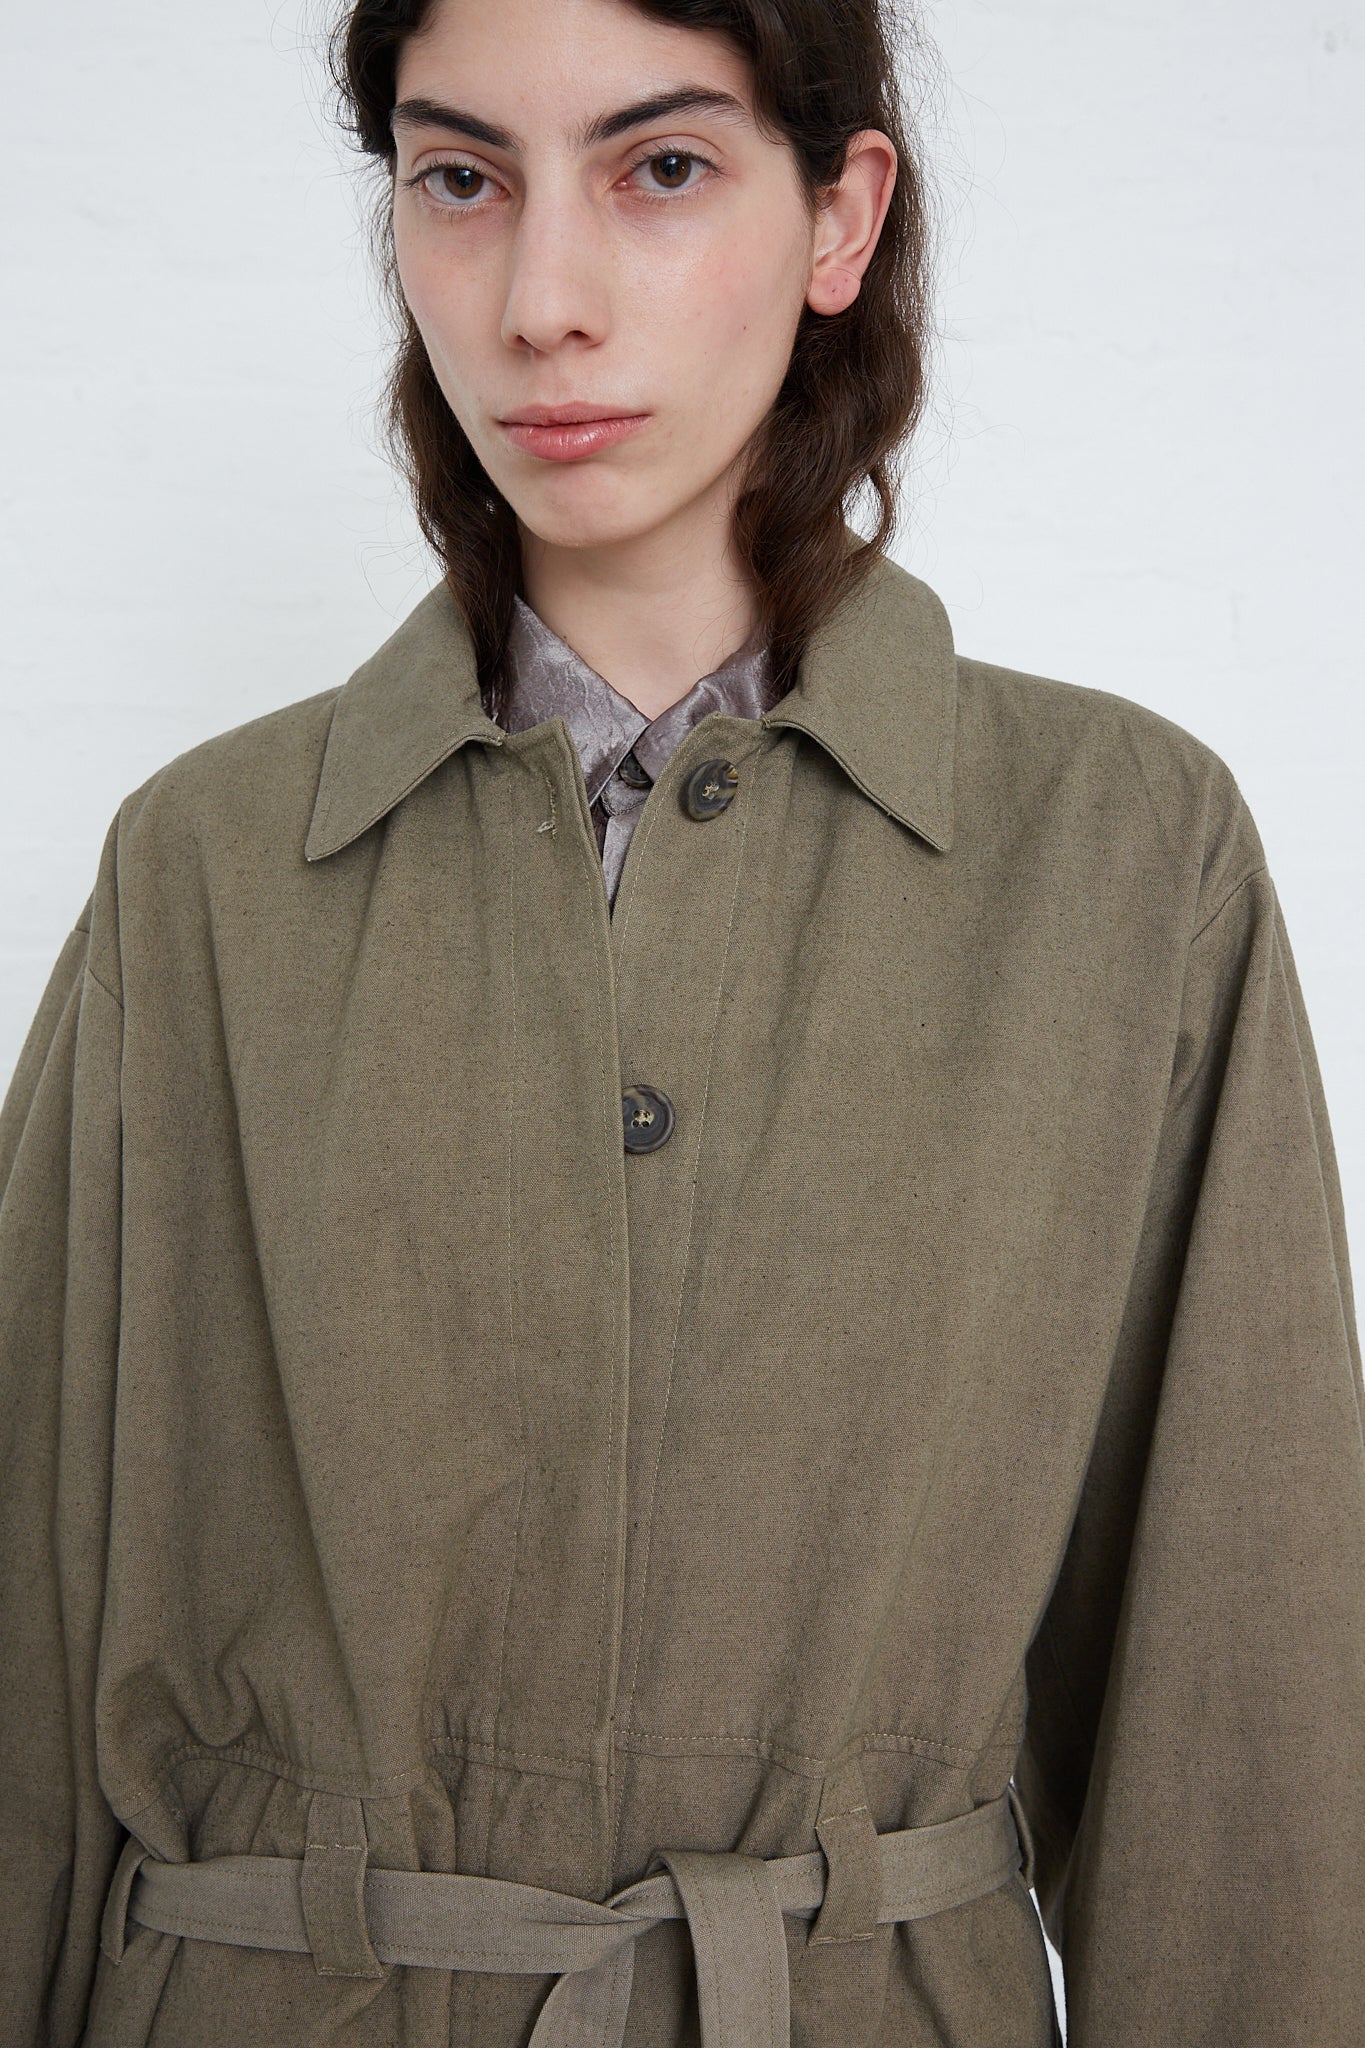 A woman wearing an oversized beltred trench in fatigue with adjustable cuffs by Lauren Manoogian.